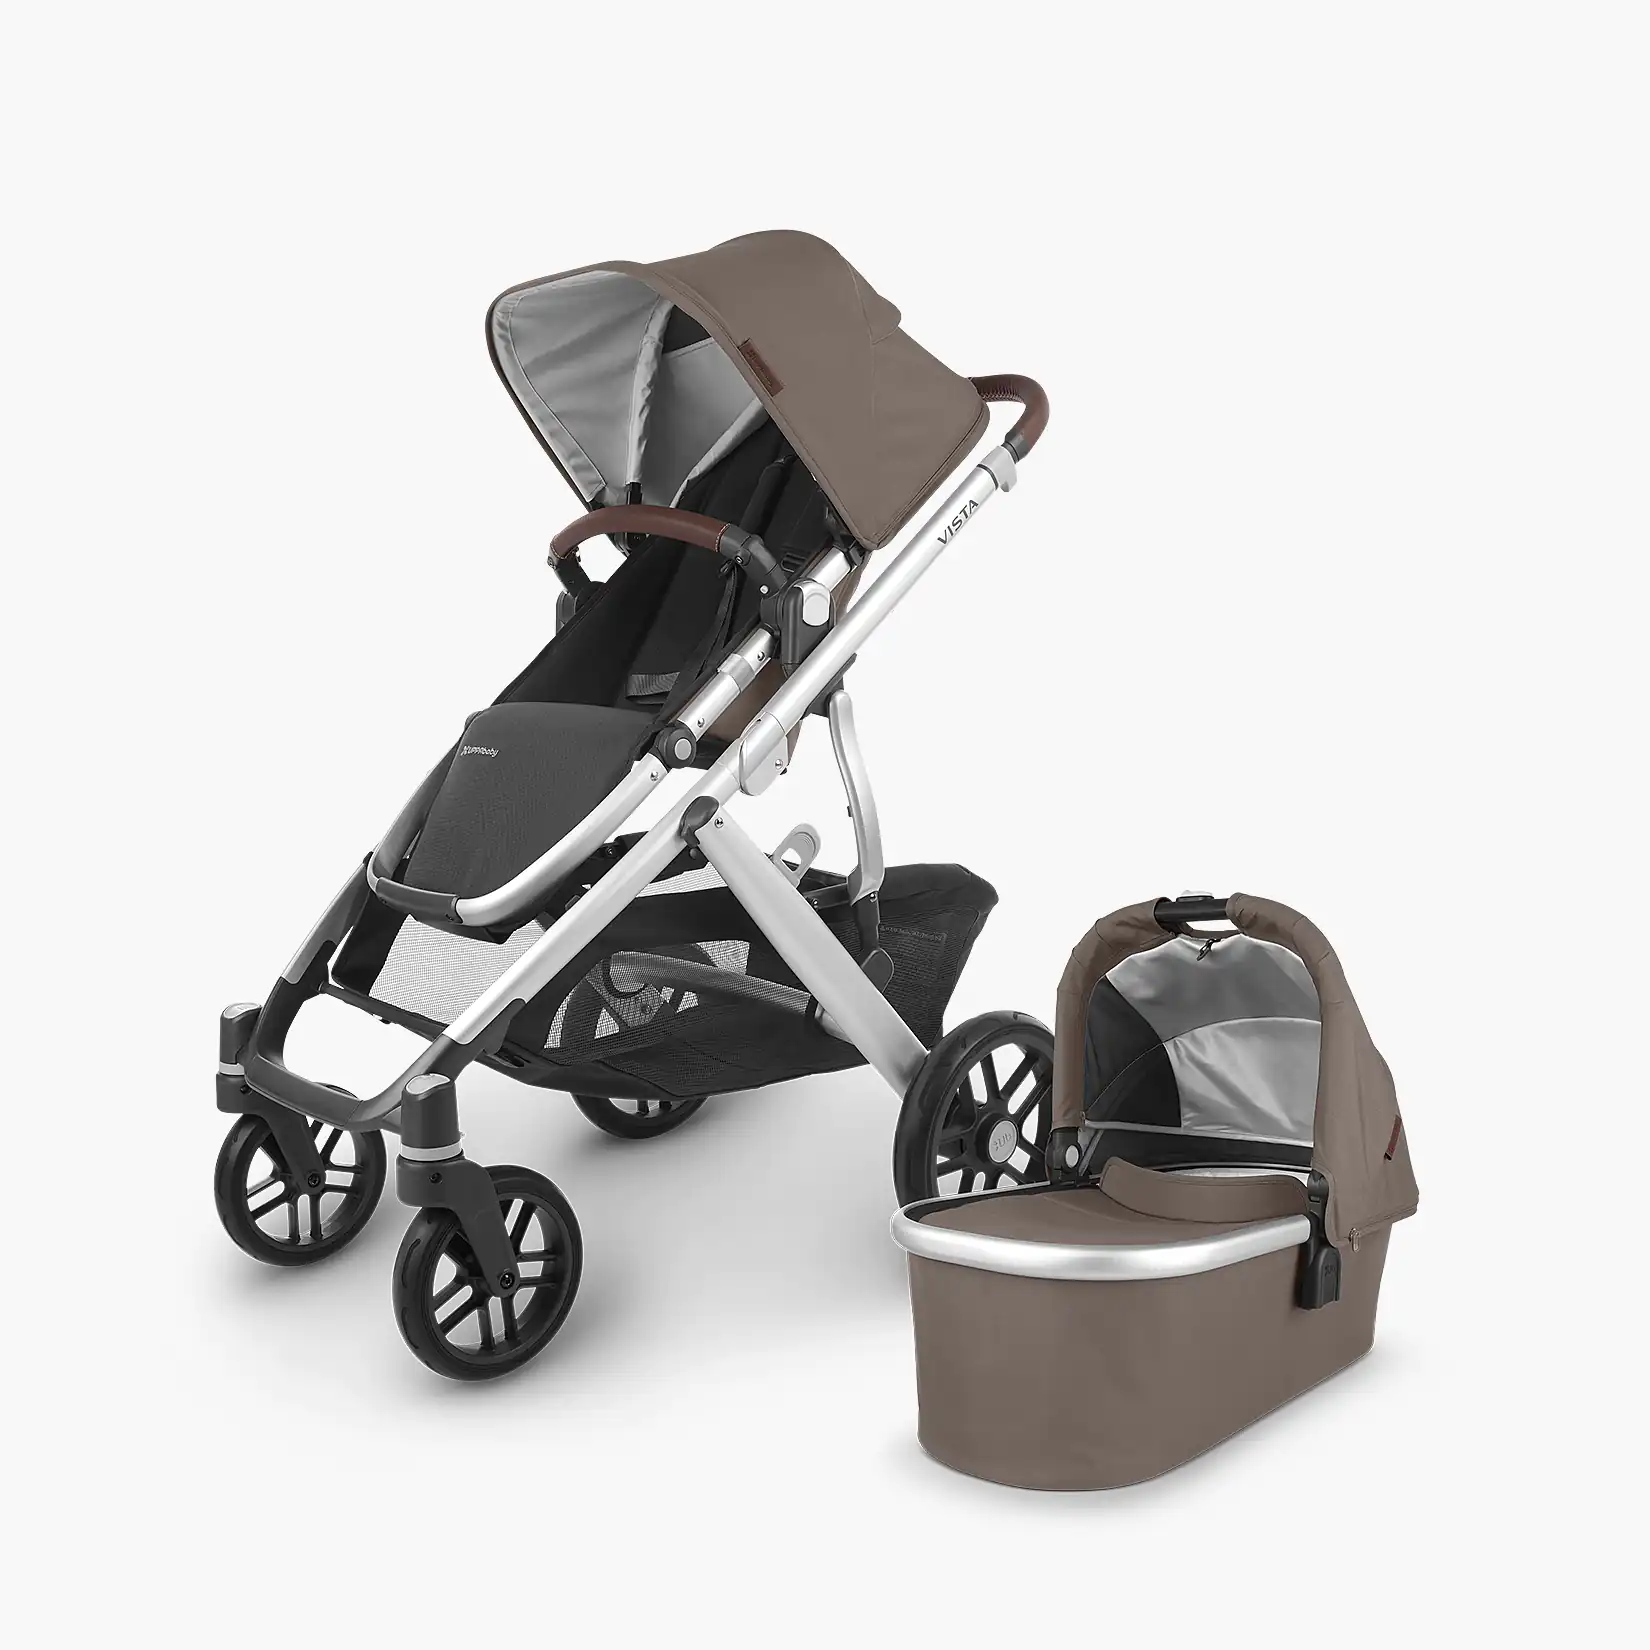 A stroller and a baby carriage.